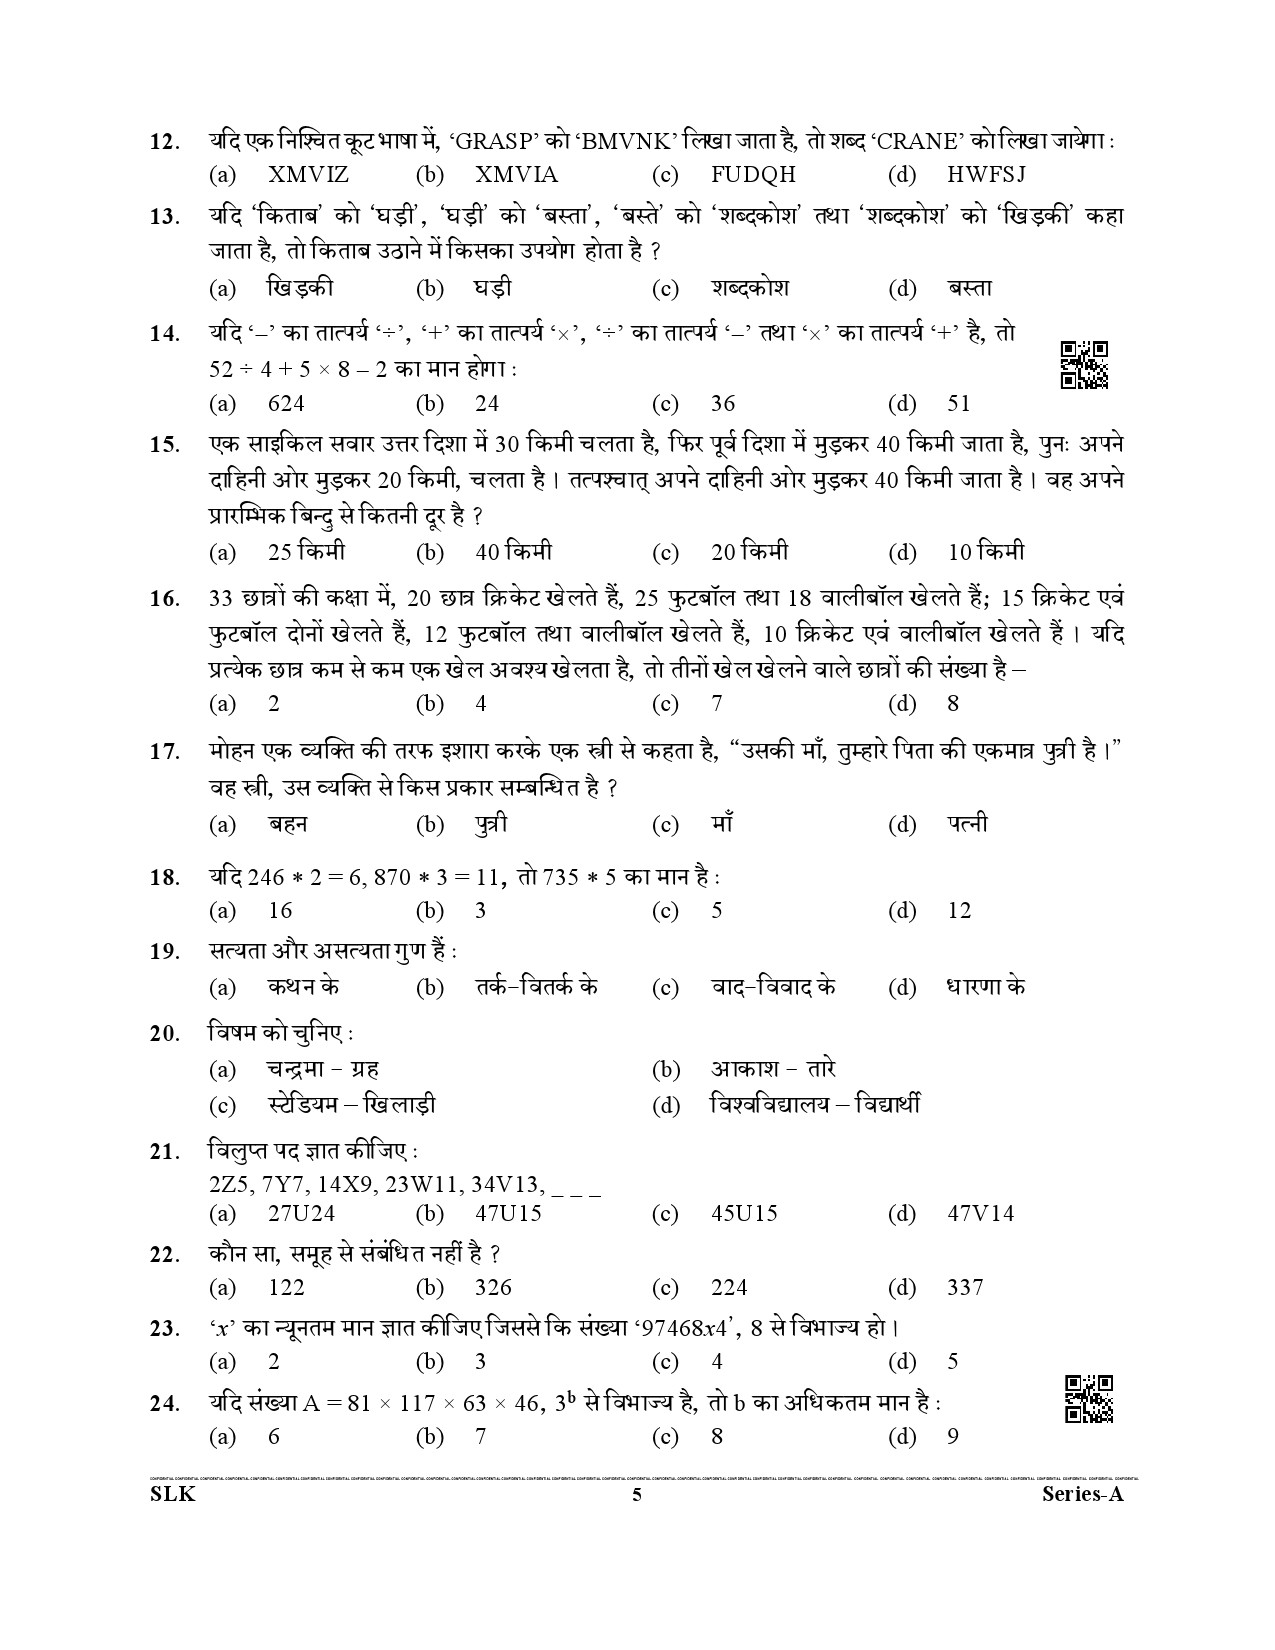 Uttarakhand Combined State Upper Subordinate Services Pre Exam 2021 Paper II 5